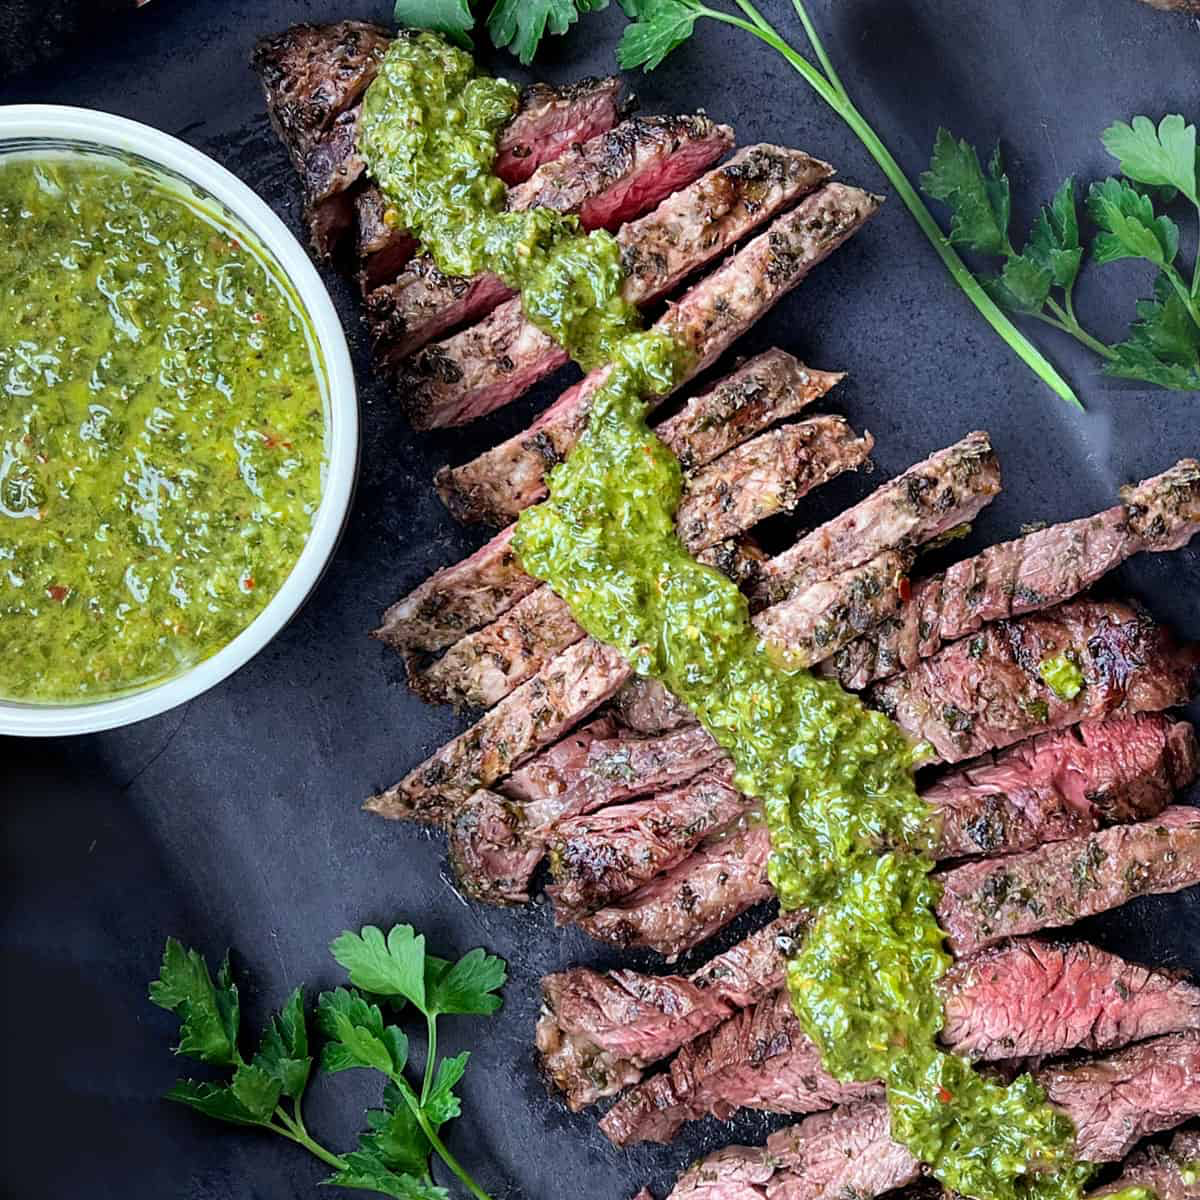 In House made Chimichurri Sauce